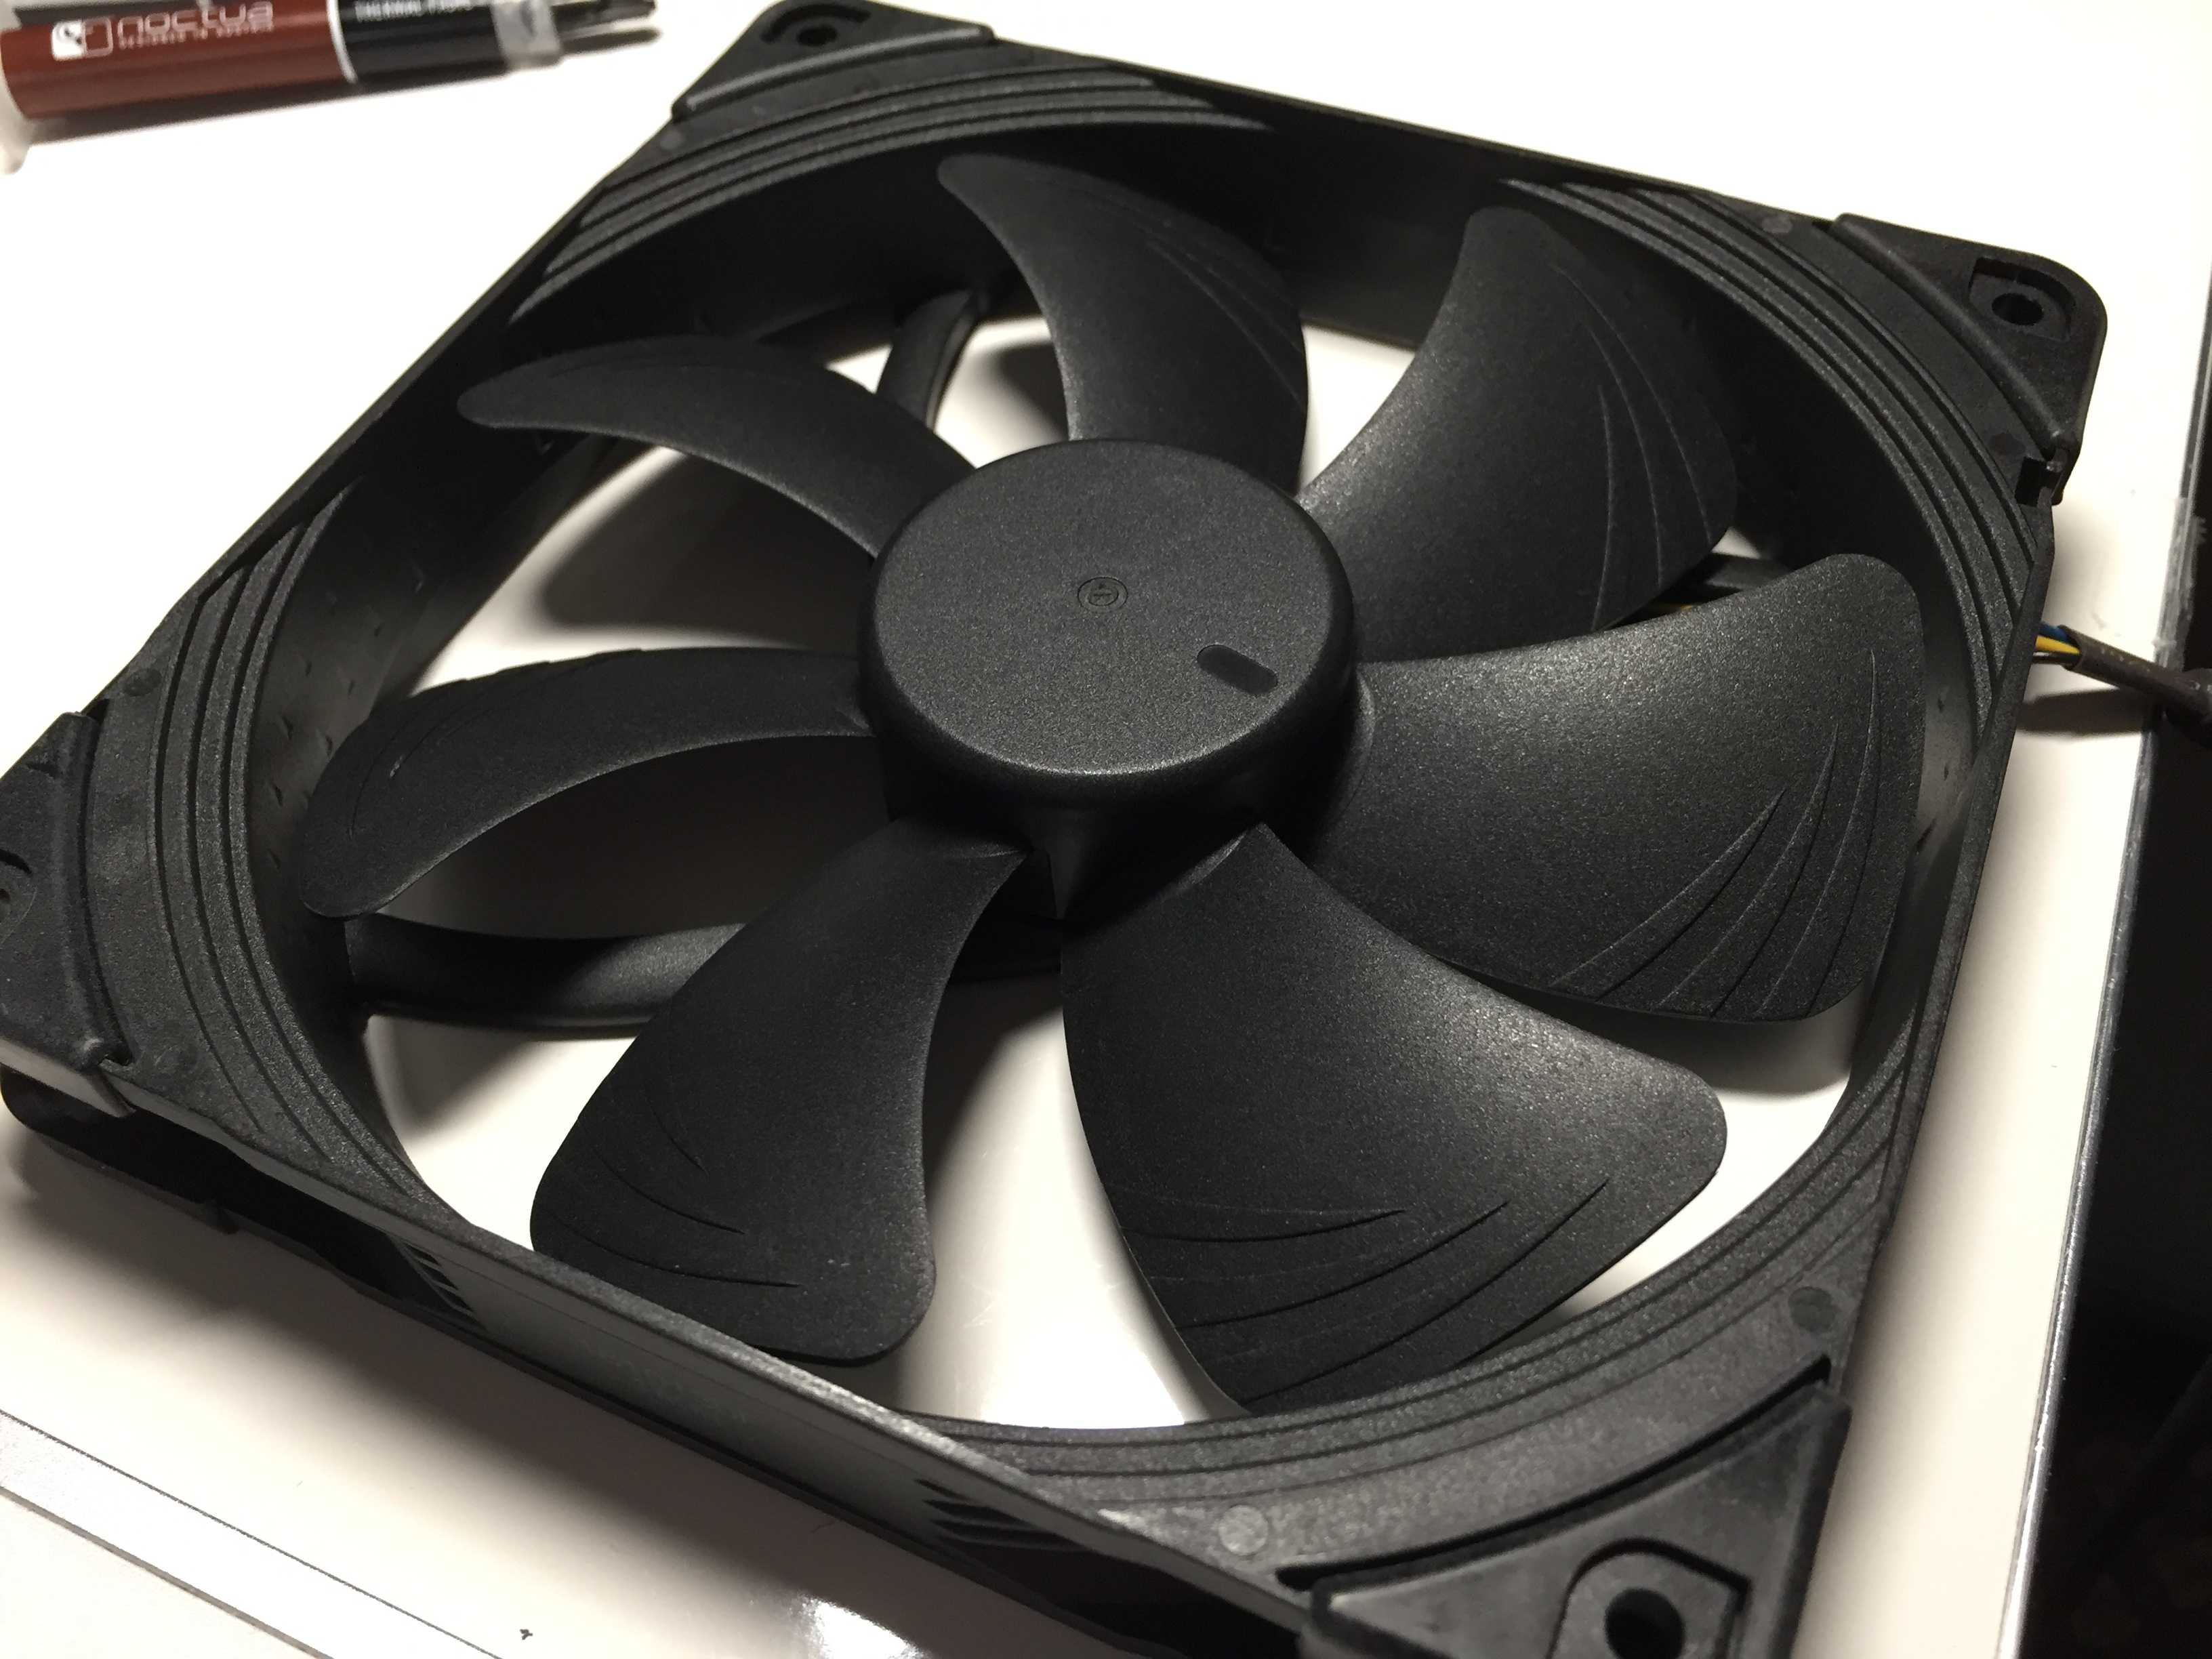 Rumor Noctua To Introduce Nh U12a Tower Cooler In Chromax Version Techpowerup